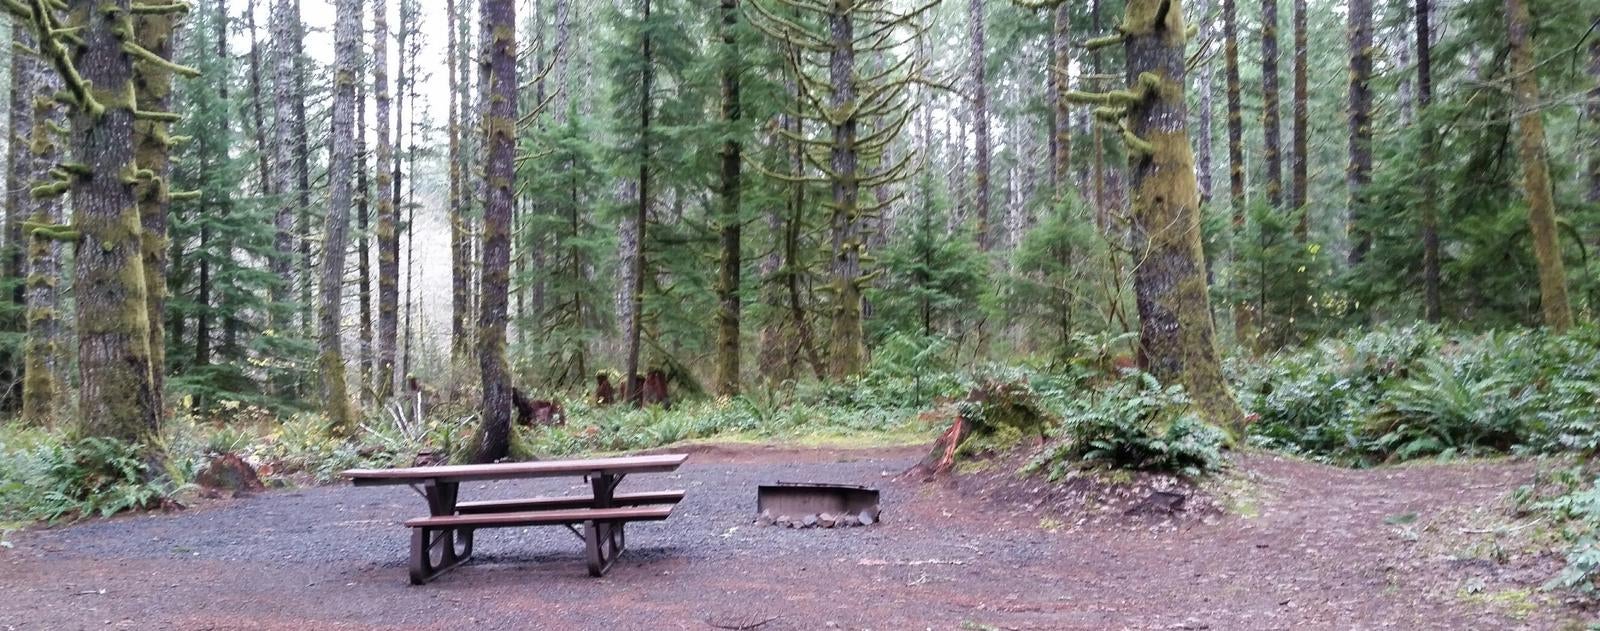 Camper submitted image from Alsea Falls Recreation Site (campground) - 5